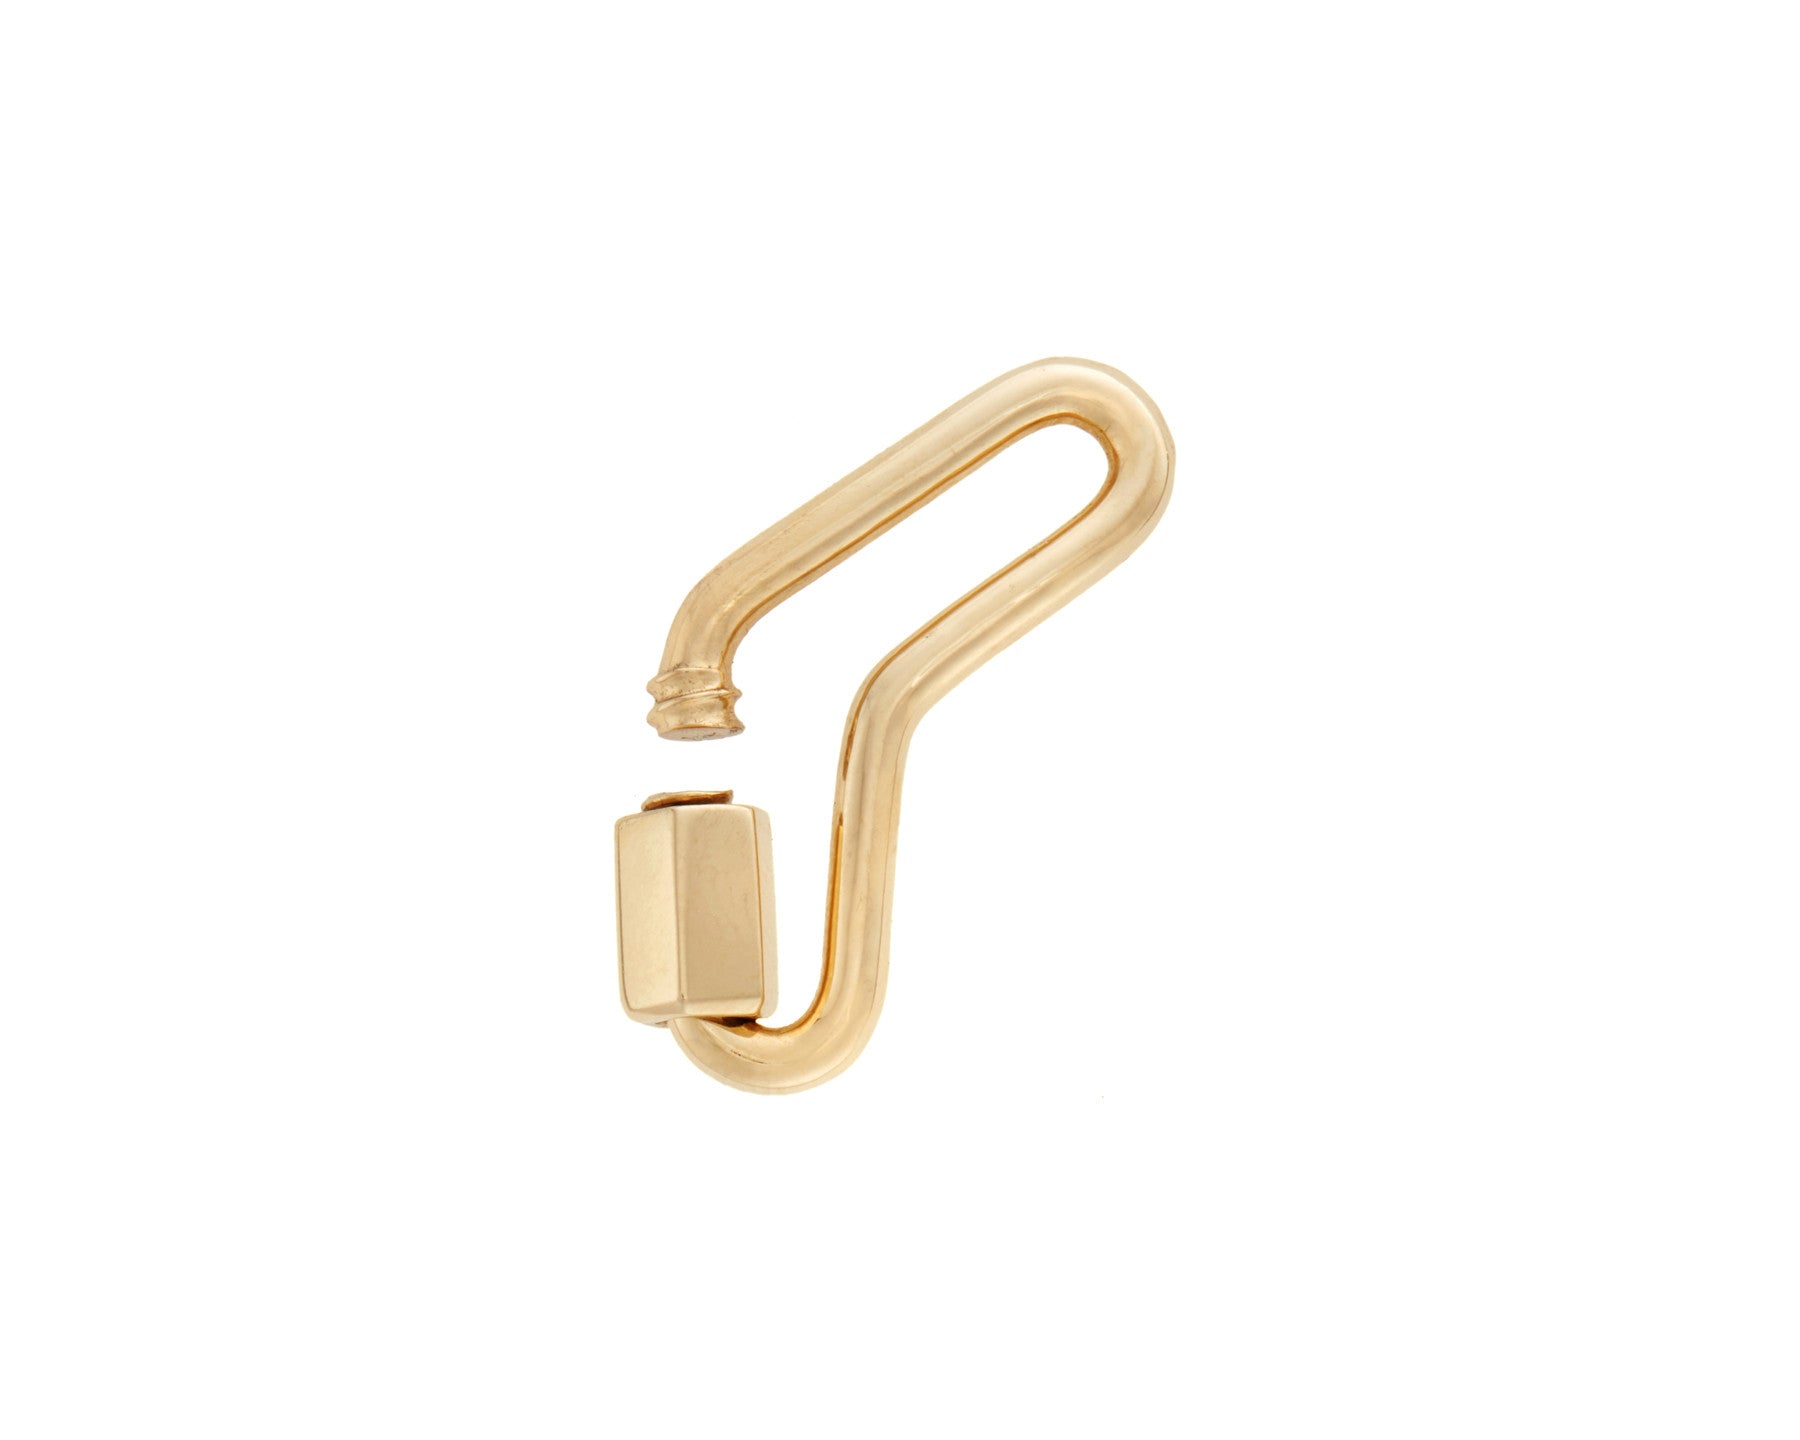 Yellow gold boomerang charm with open clasp